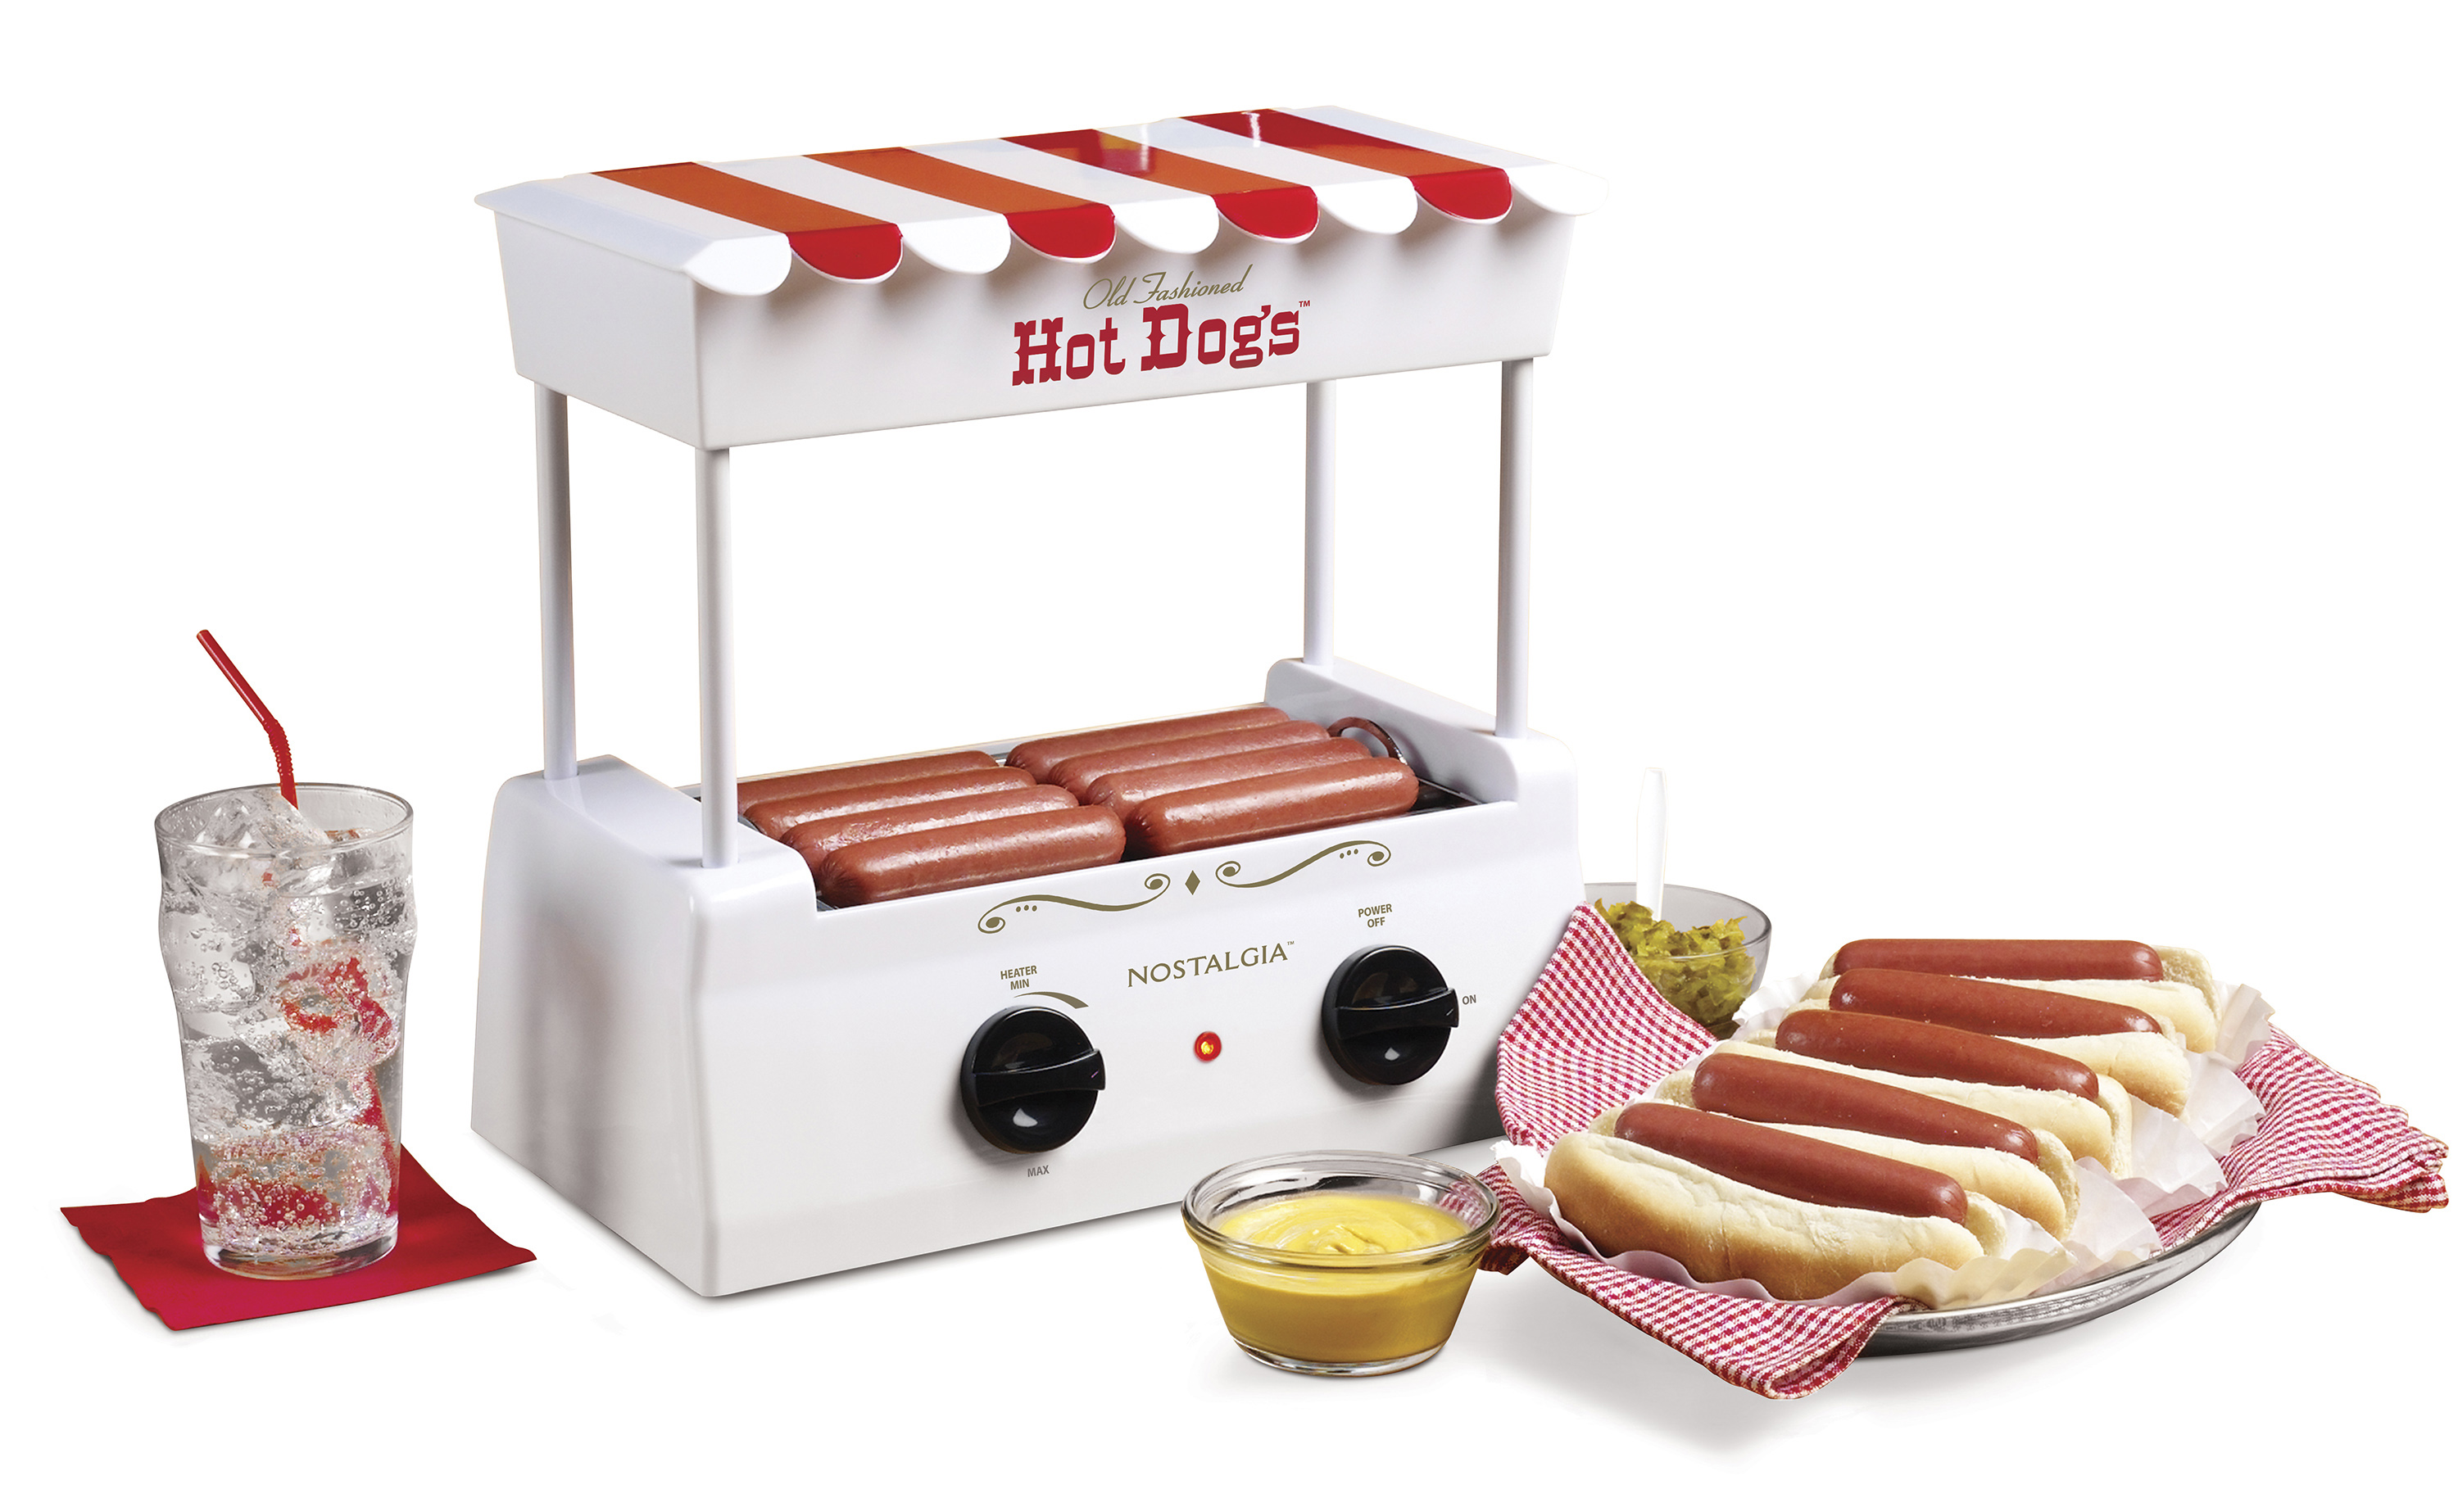 Nostalgia HDR565 Countertop Hot Dog Roller and Warmer, 8 Regular Sized or 4 Foot Long Hot Dogs and 6 Bun Capacity – White - image 3 of 4